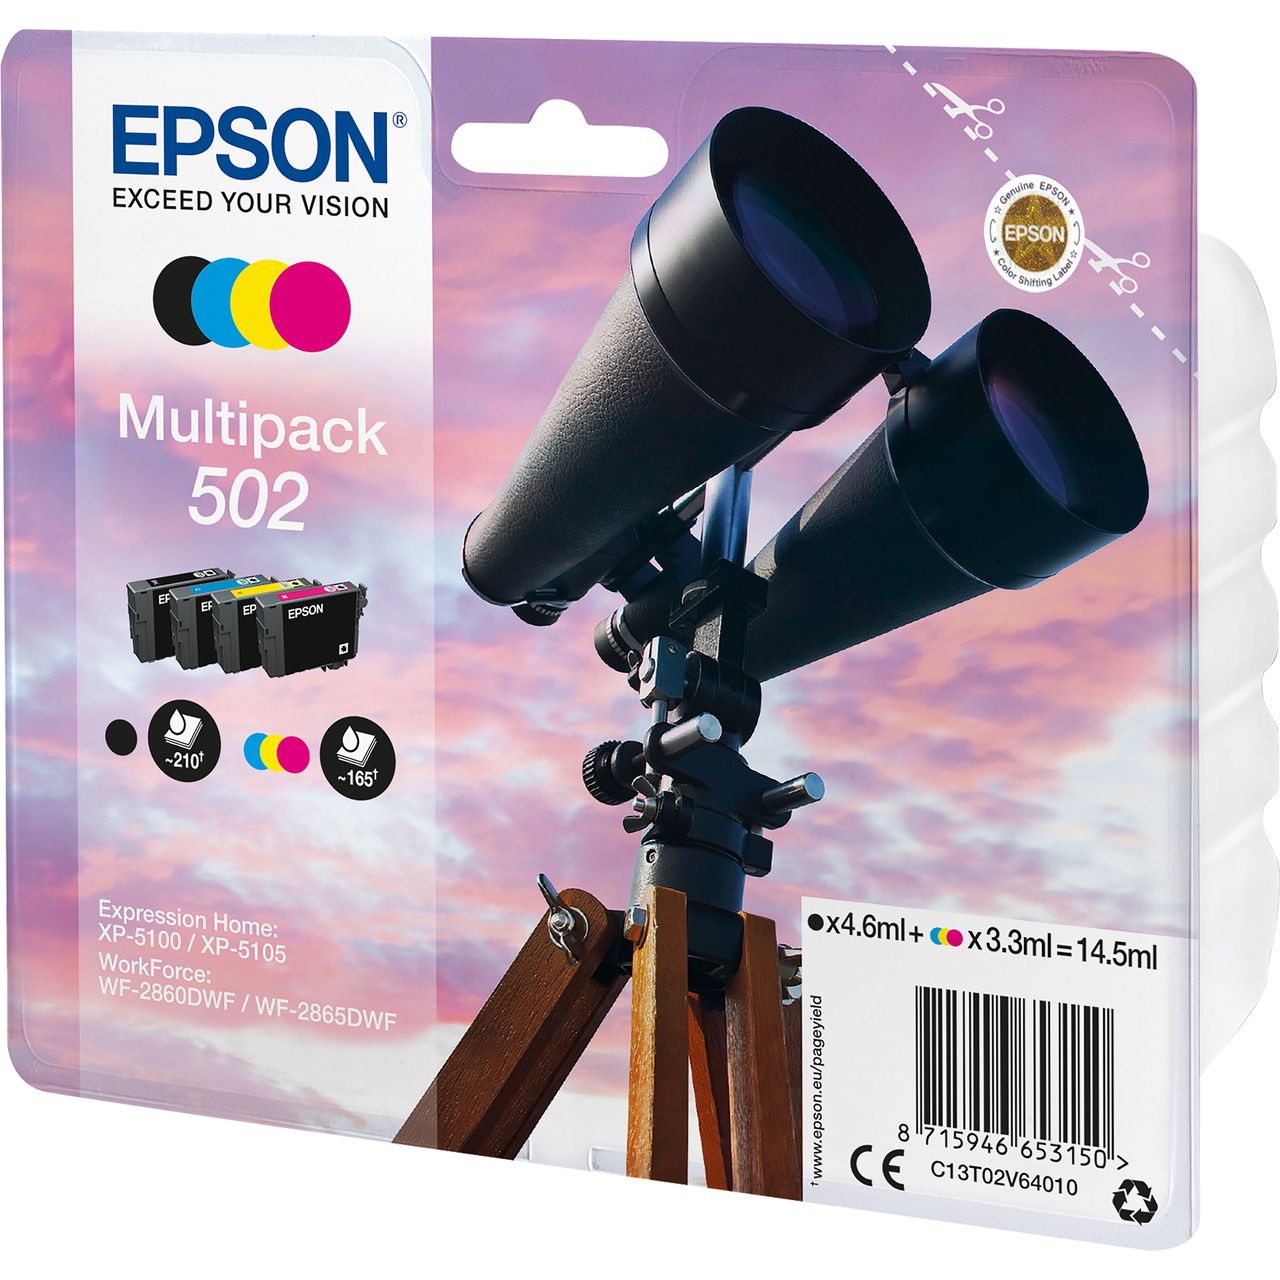 Epson Binocular Multipack 4-colours 502 Ink Review